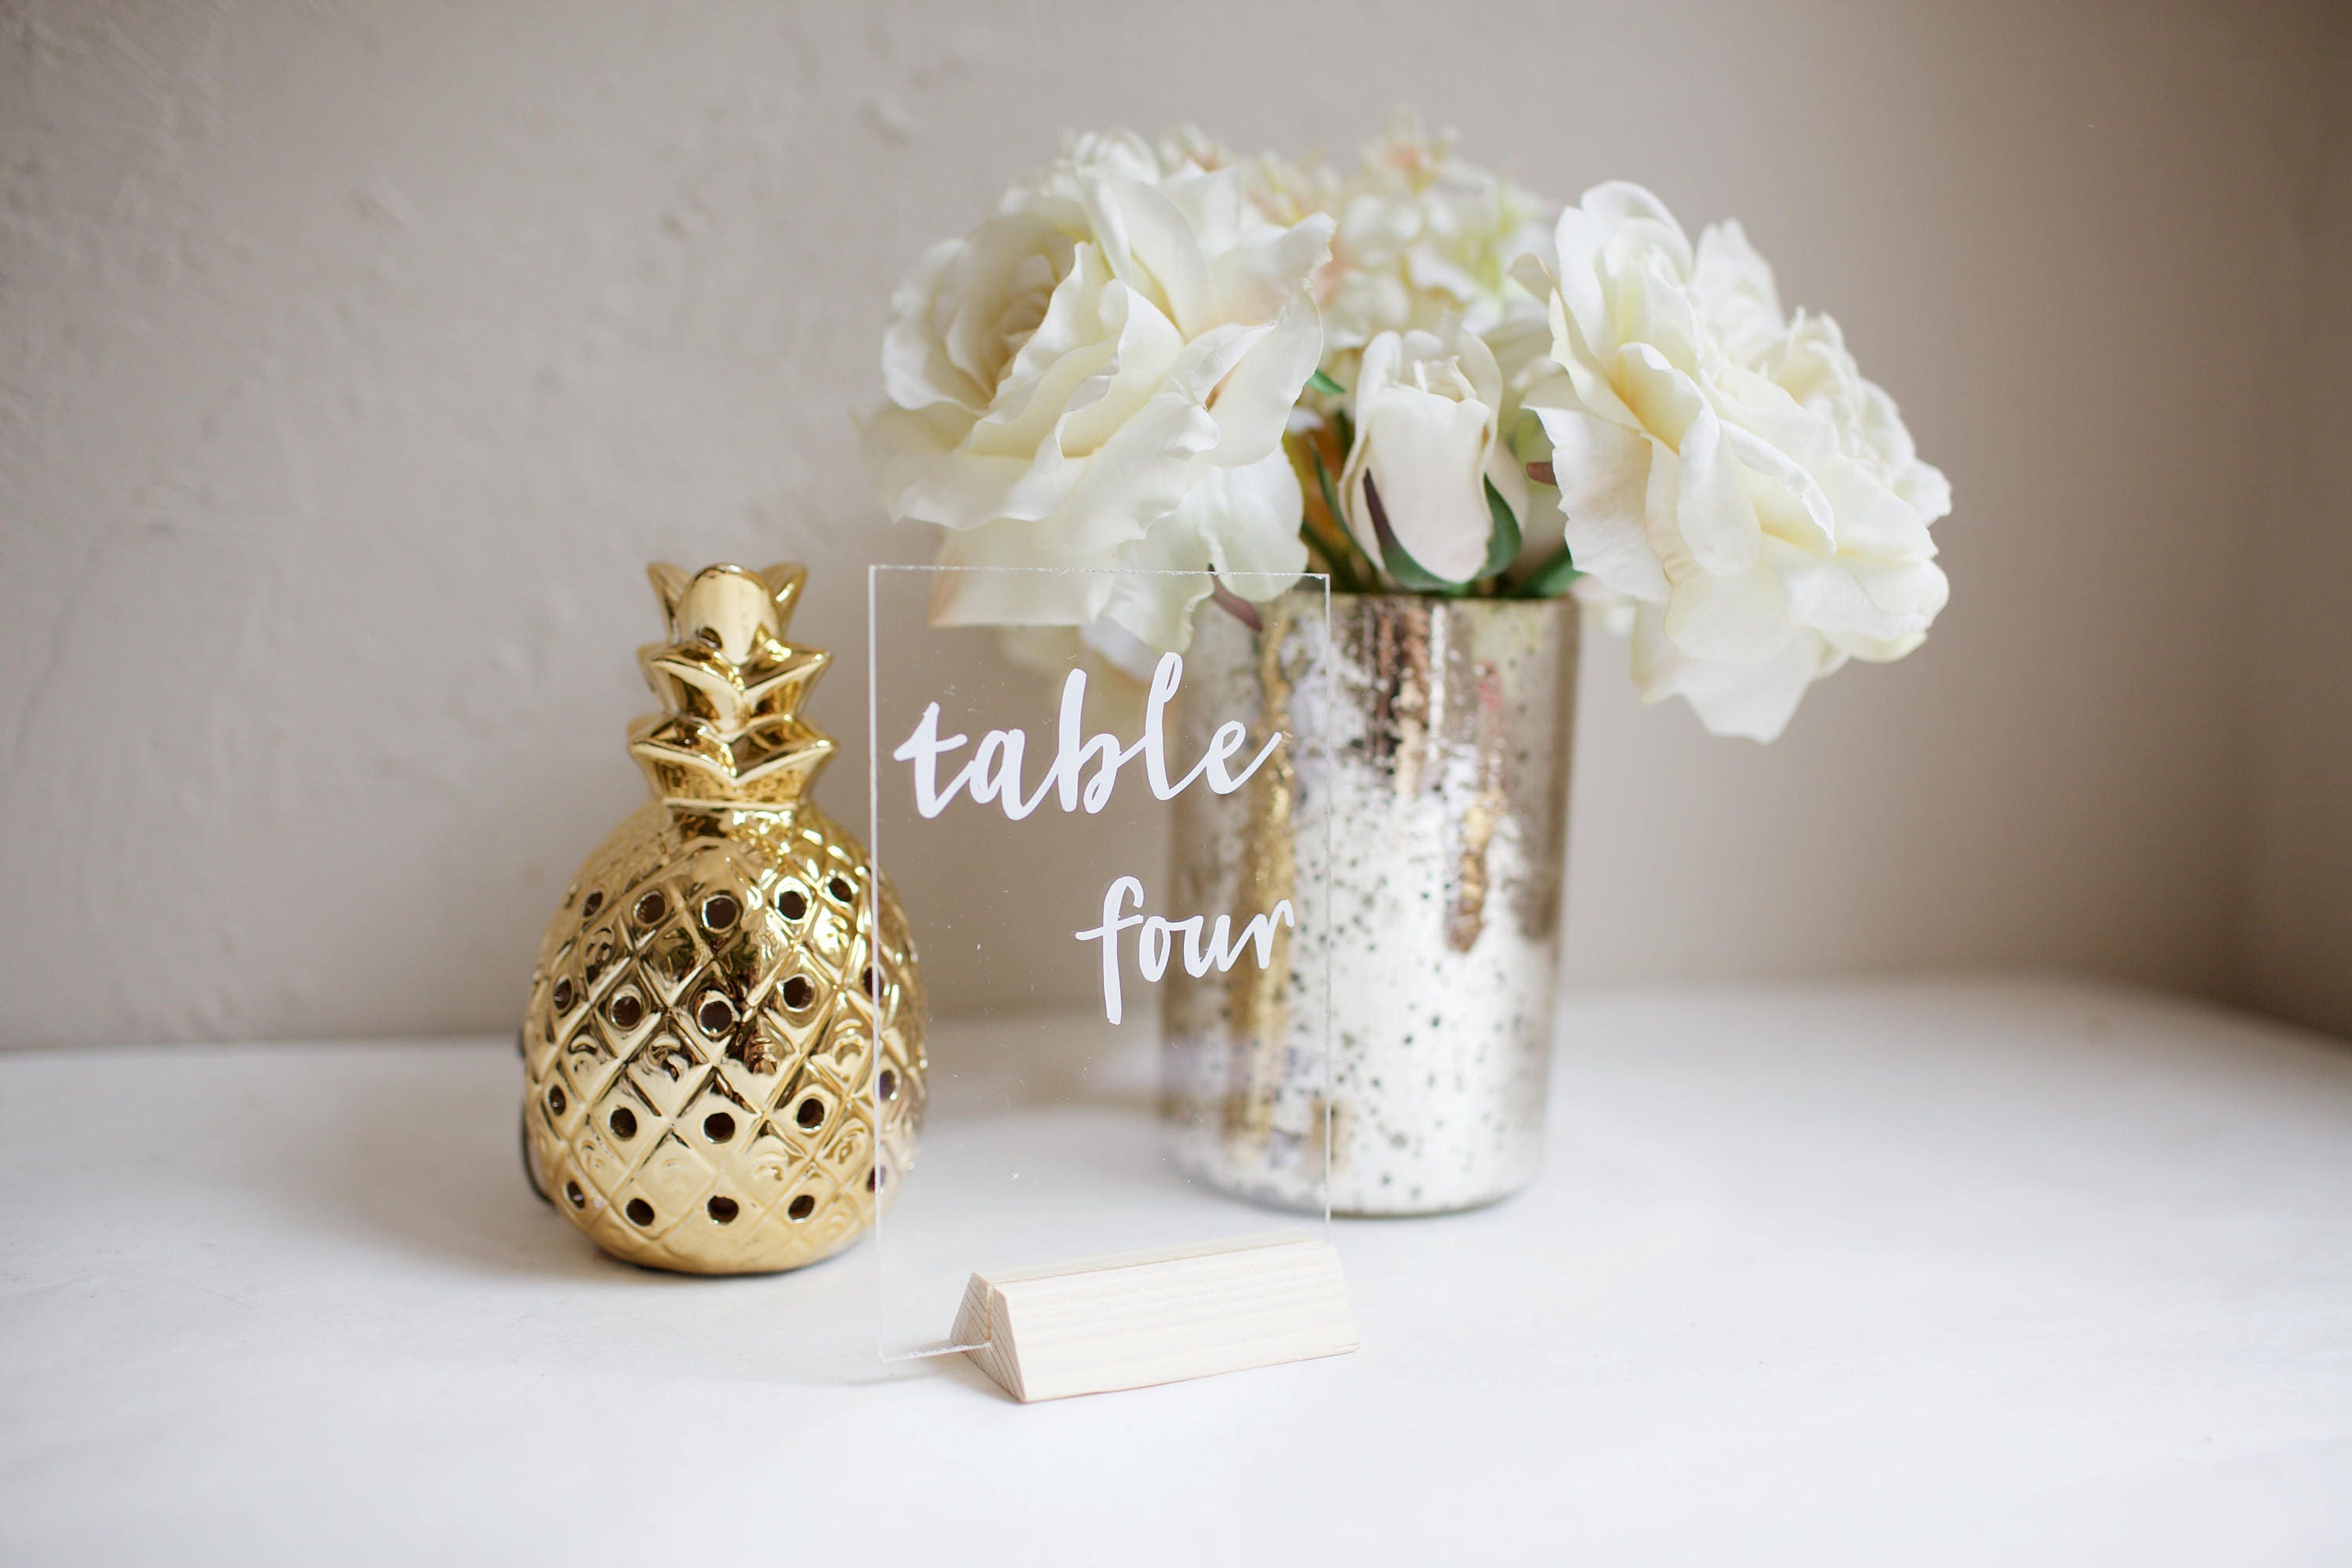 Acrylic table numbers or names. Size 4 x 6". Clear plexiglass. Custom designed for your unique wedding style. Any font or style